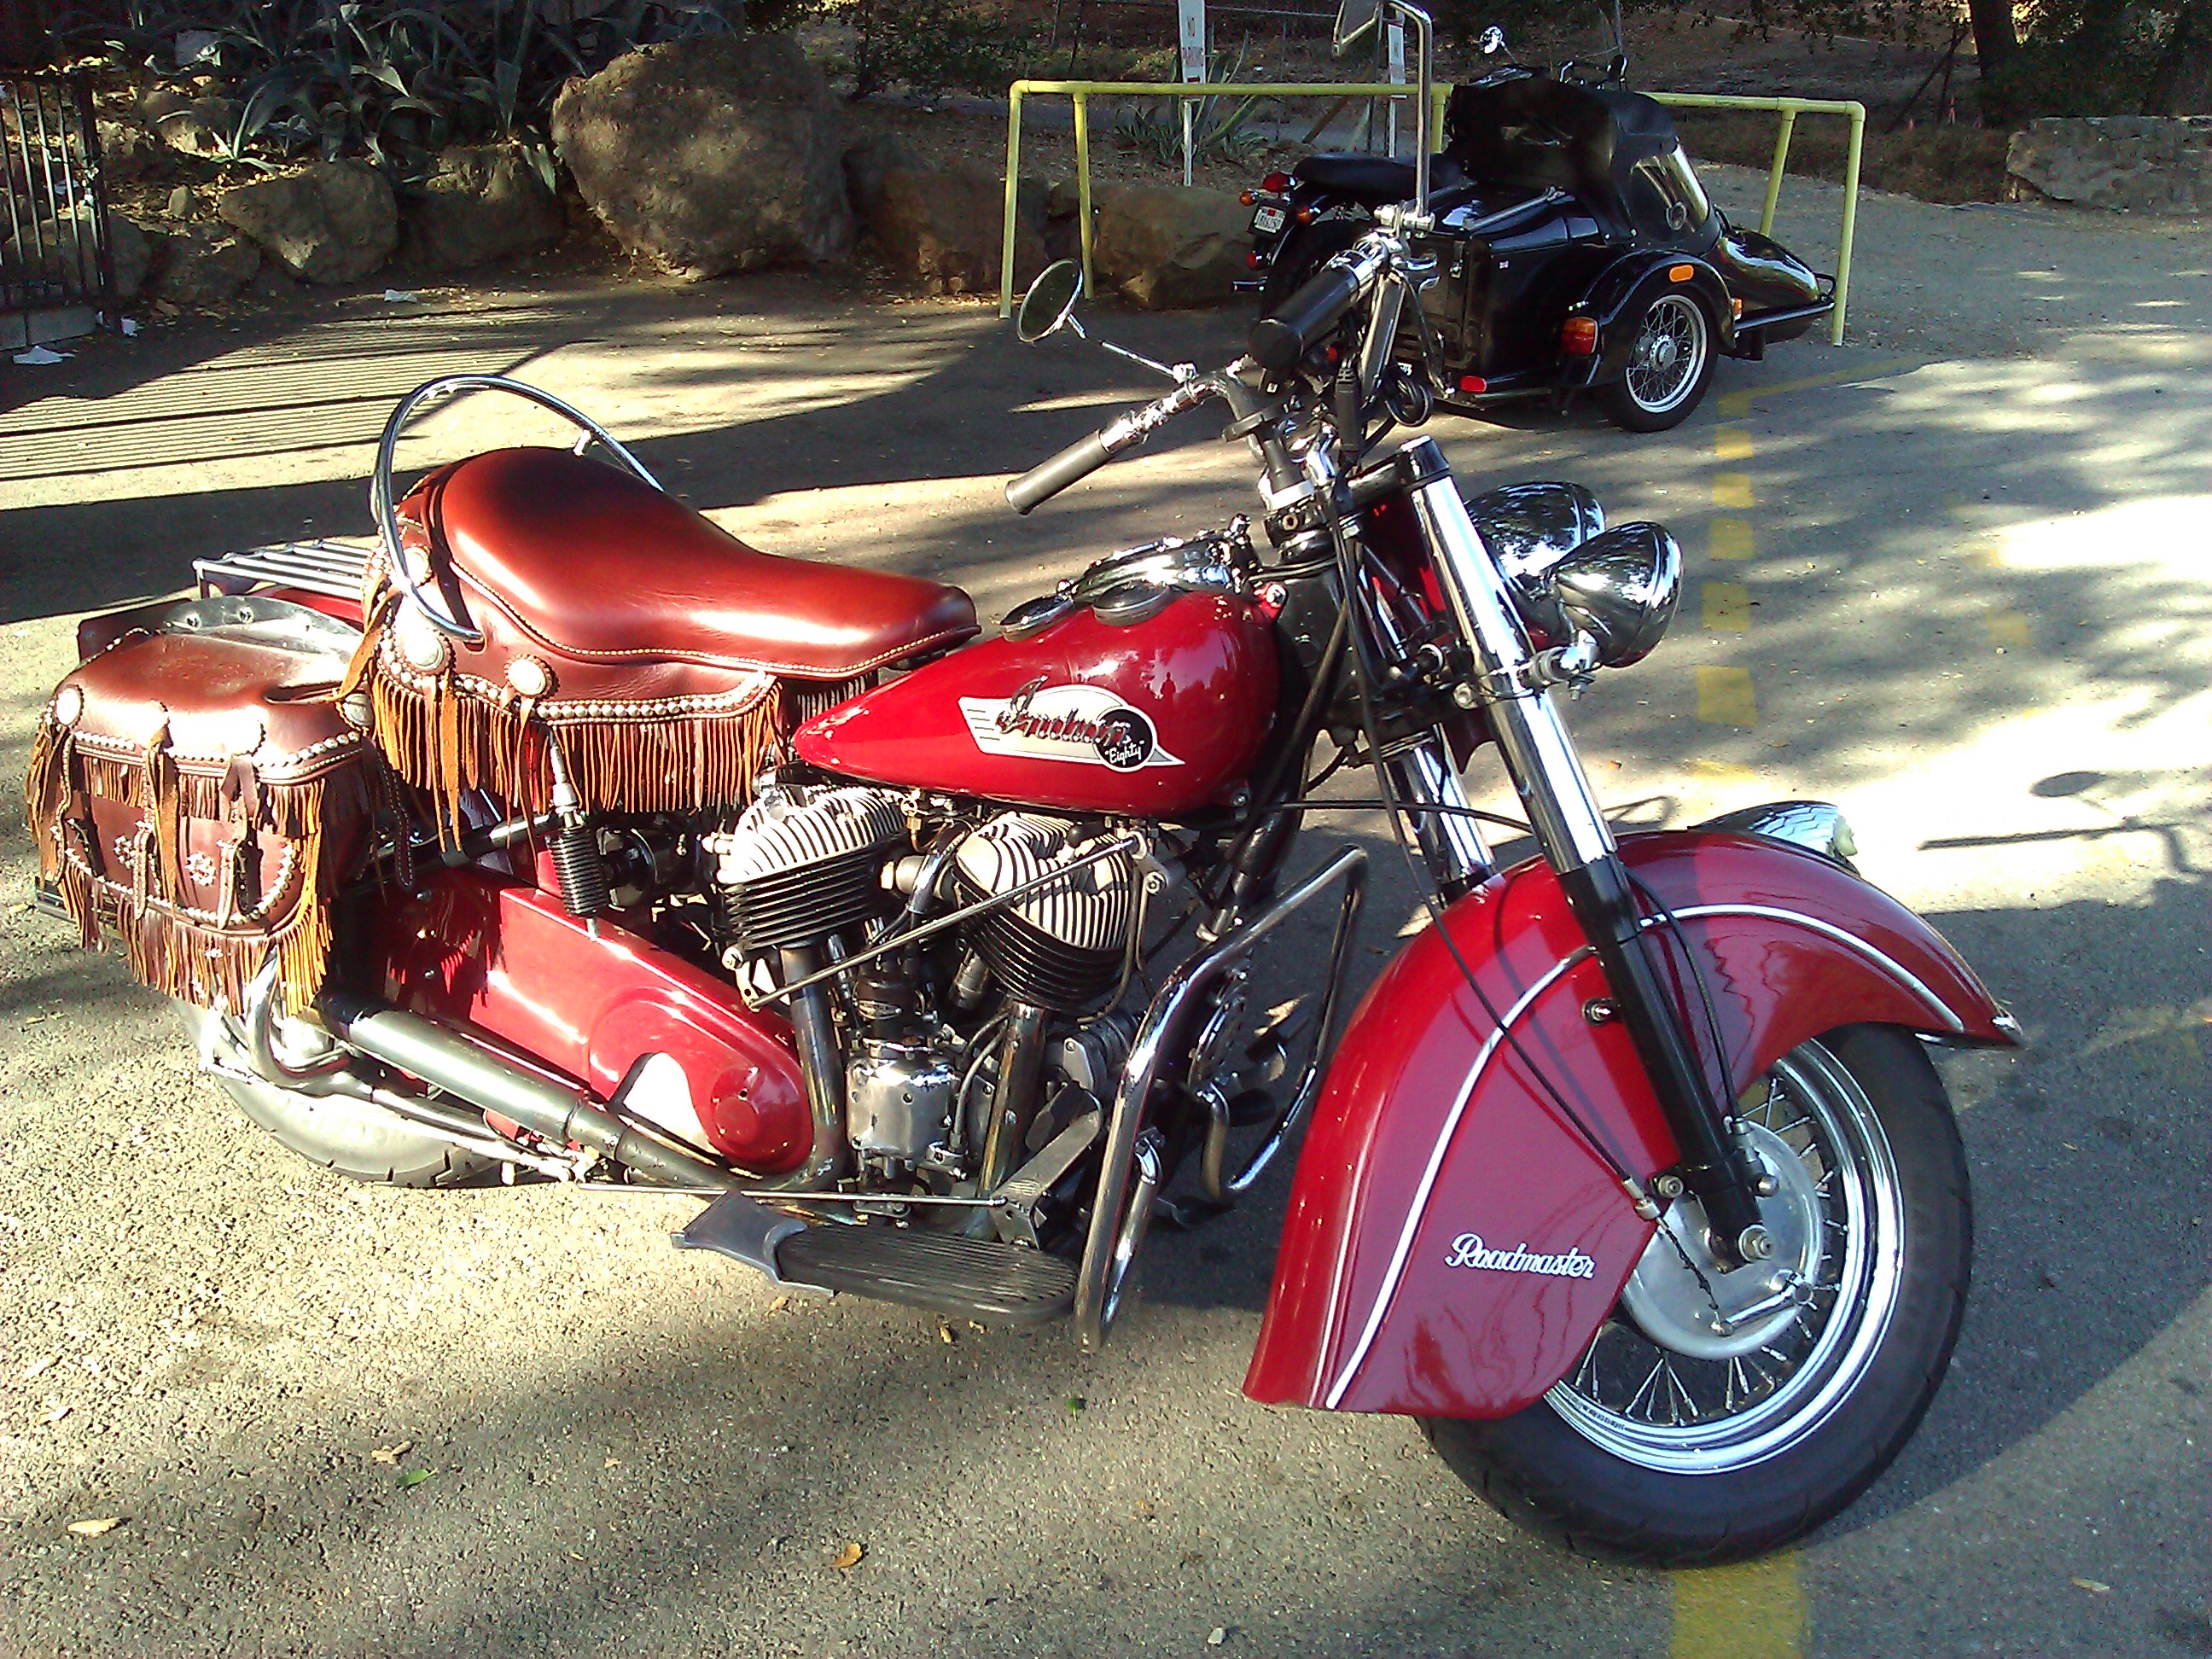 David's Main Squeeze, 1950 Indian Chief